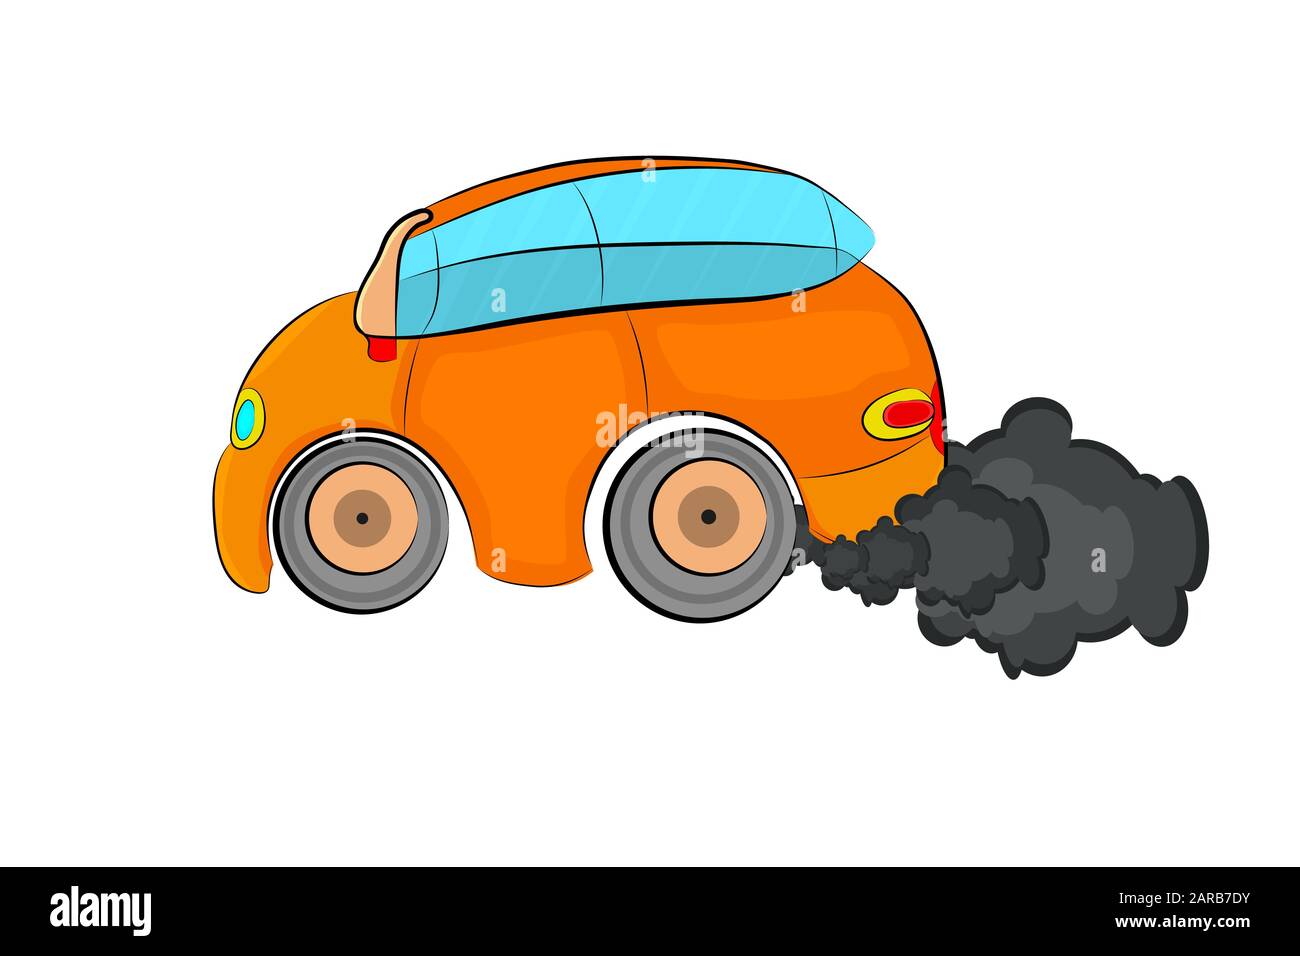 Car and smoke isolated on white background. Car producing cloud of air pollution. Vehicle toxic pollution or environment car waste hazard.Smog. Vector Stock Vector